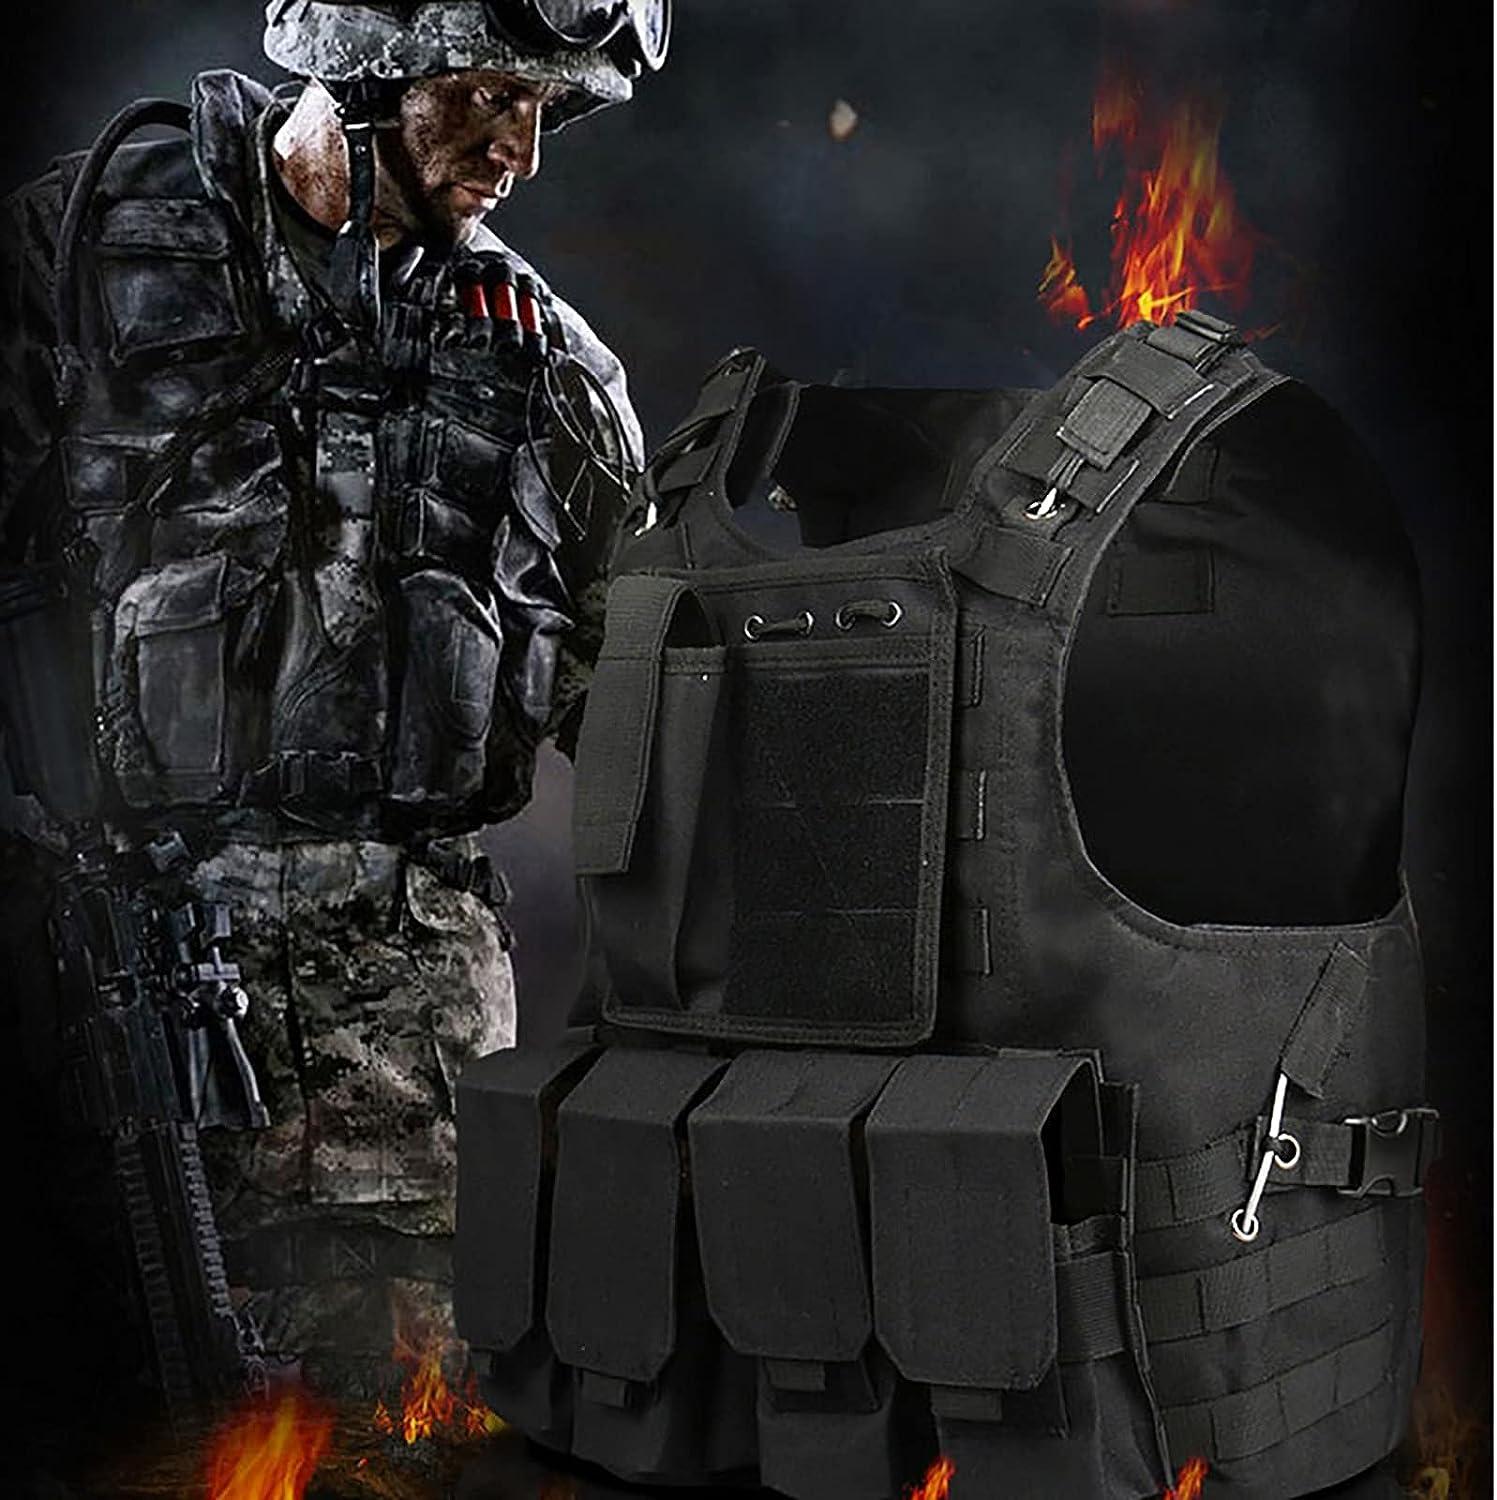 U.S Tactical Vest Military Airsoft Hunting Combat Training Gear Paint Ball  Black